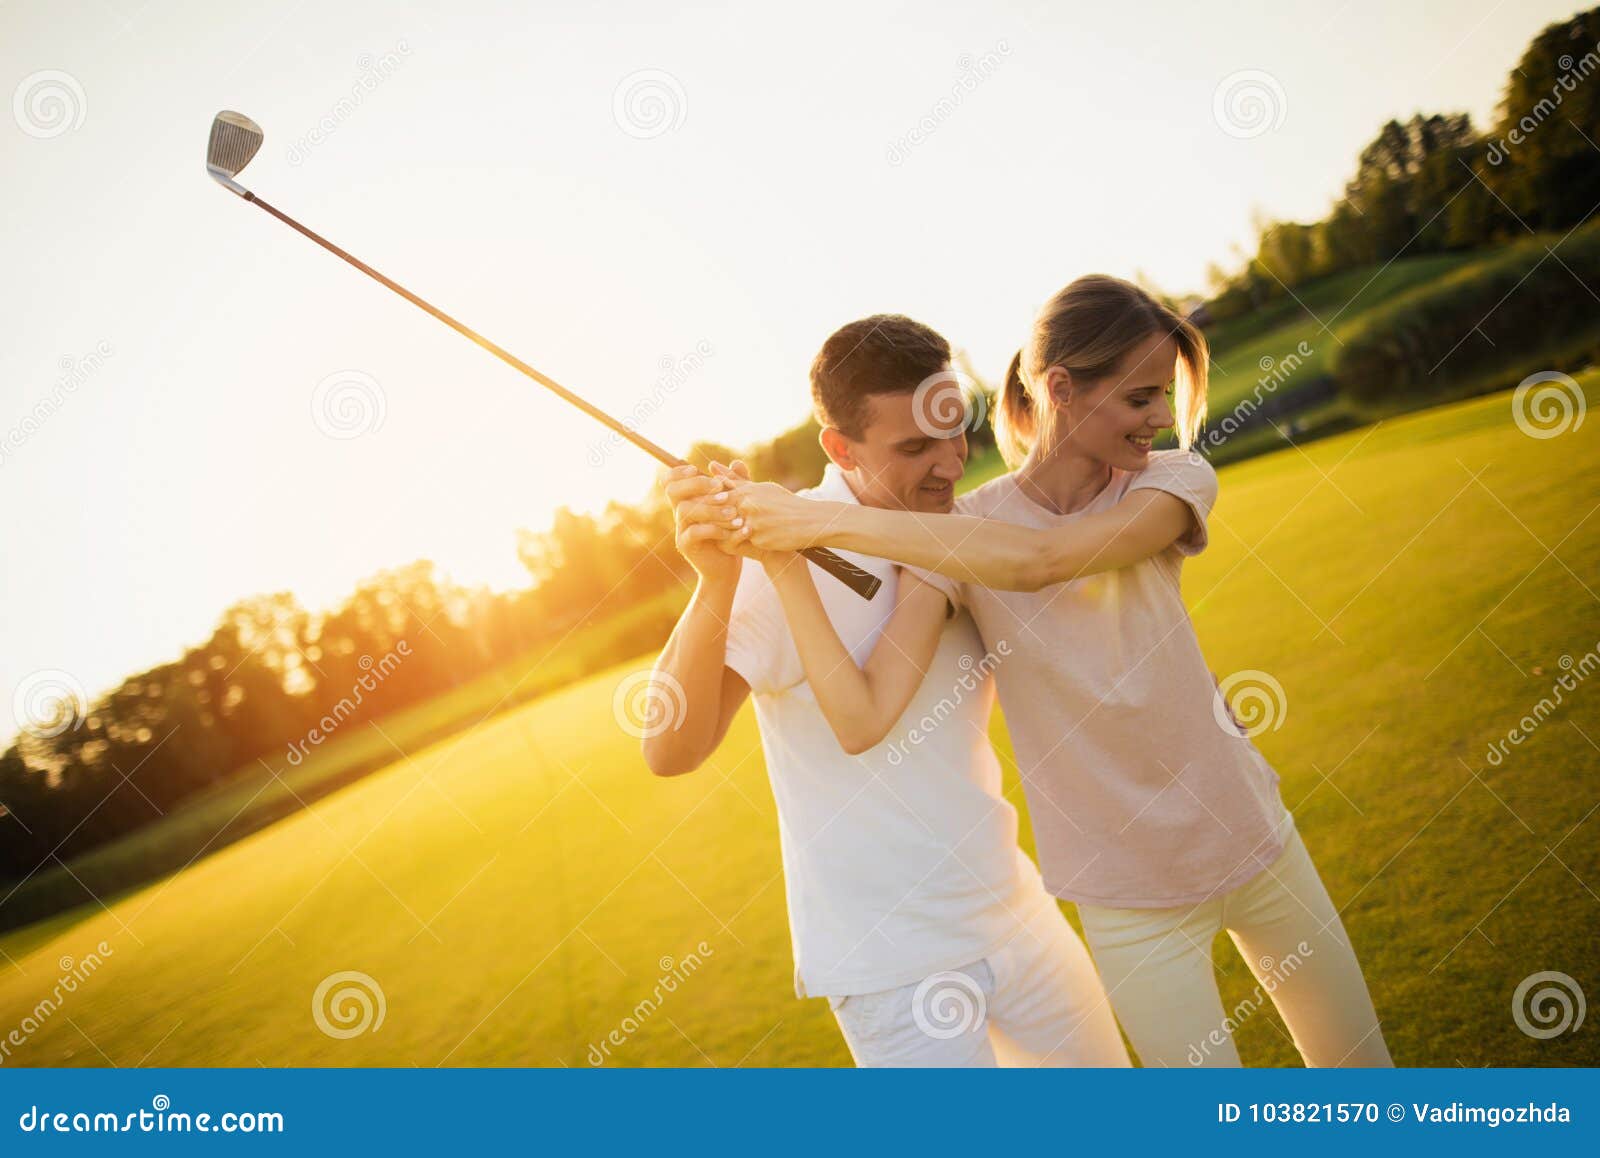 1 0 672 Couple Photos Free Royalty Free Stock Photos From Dreamstime